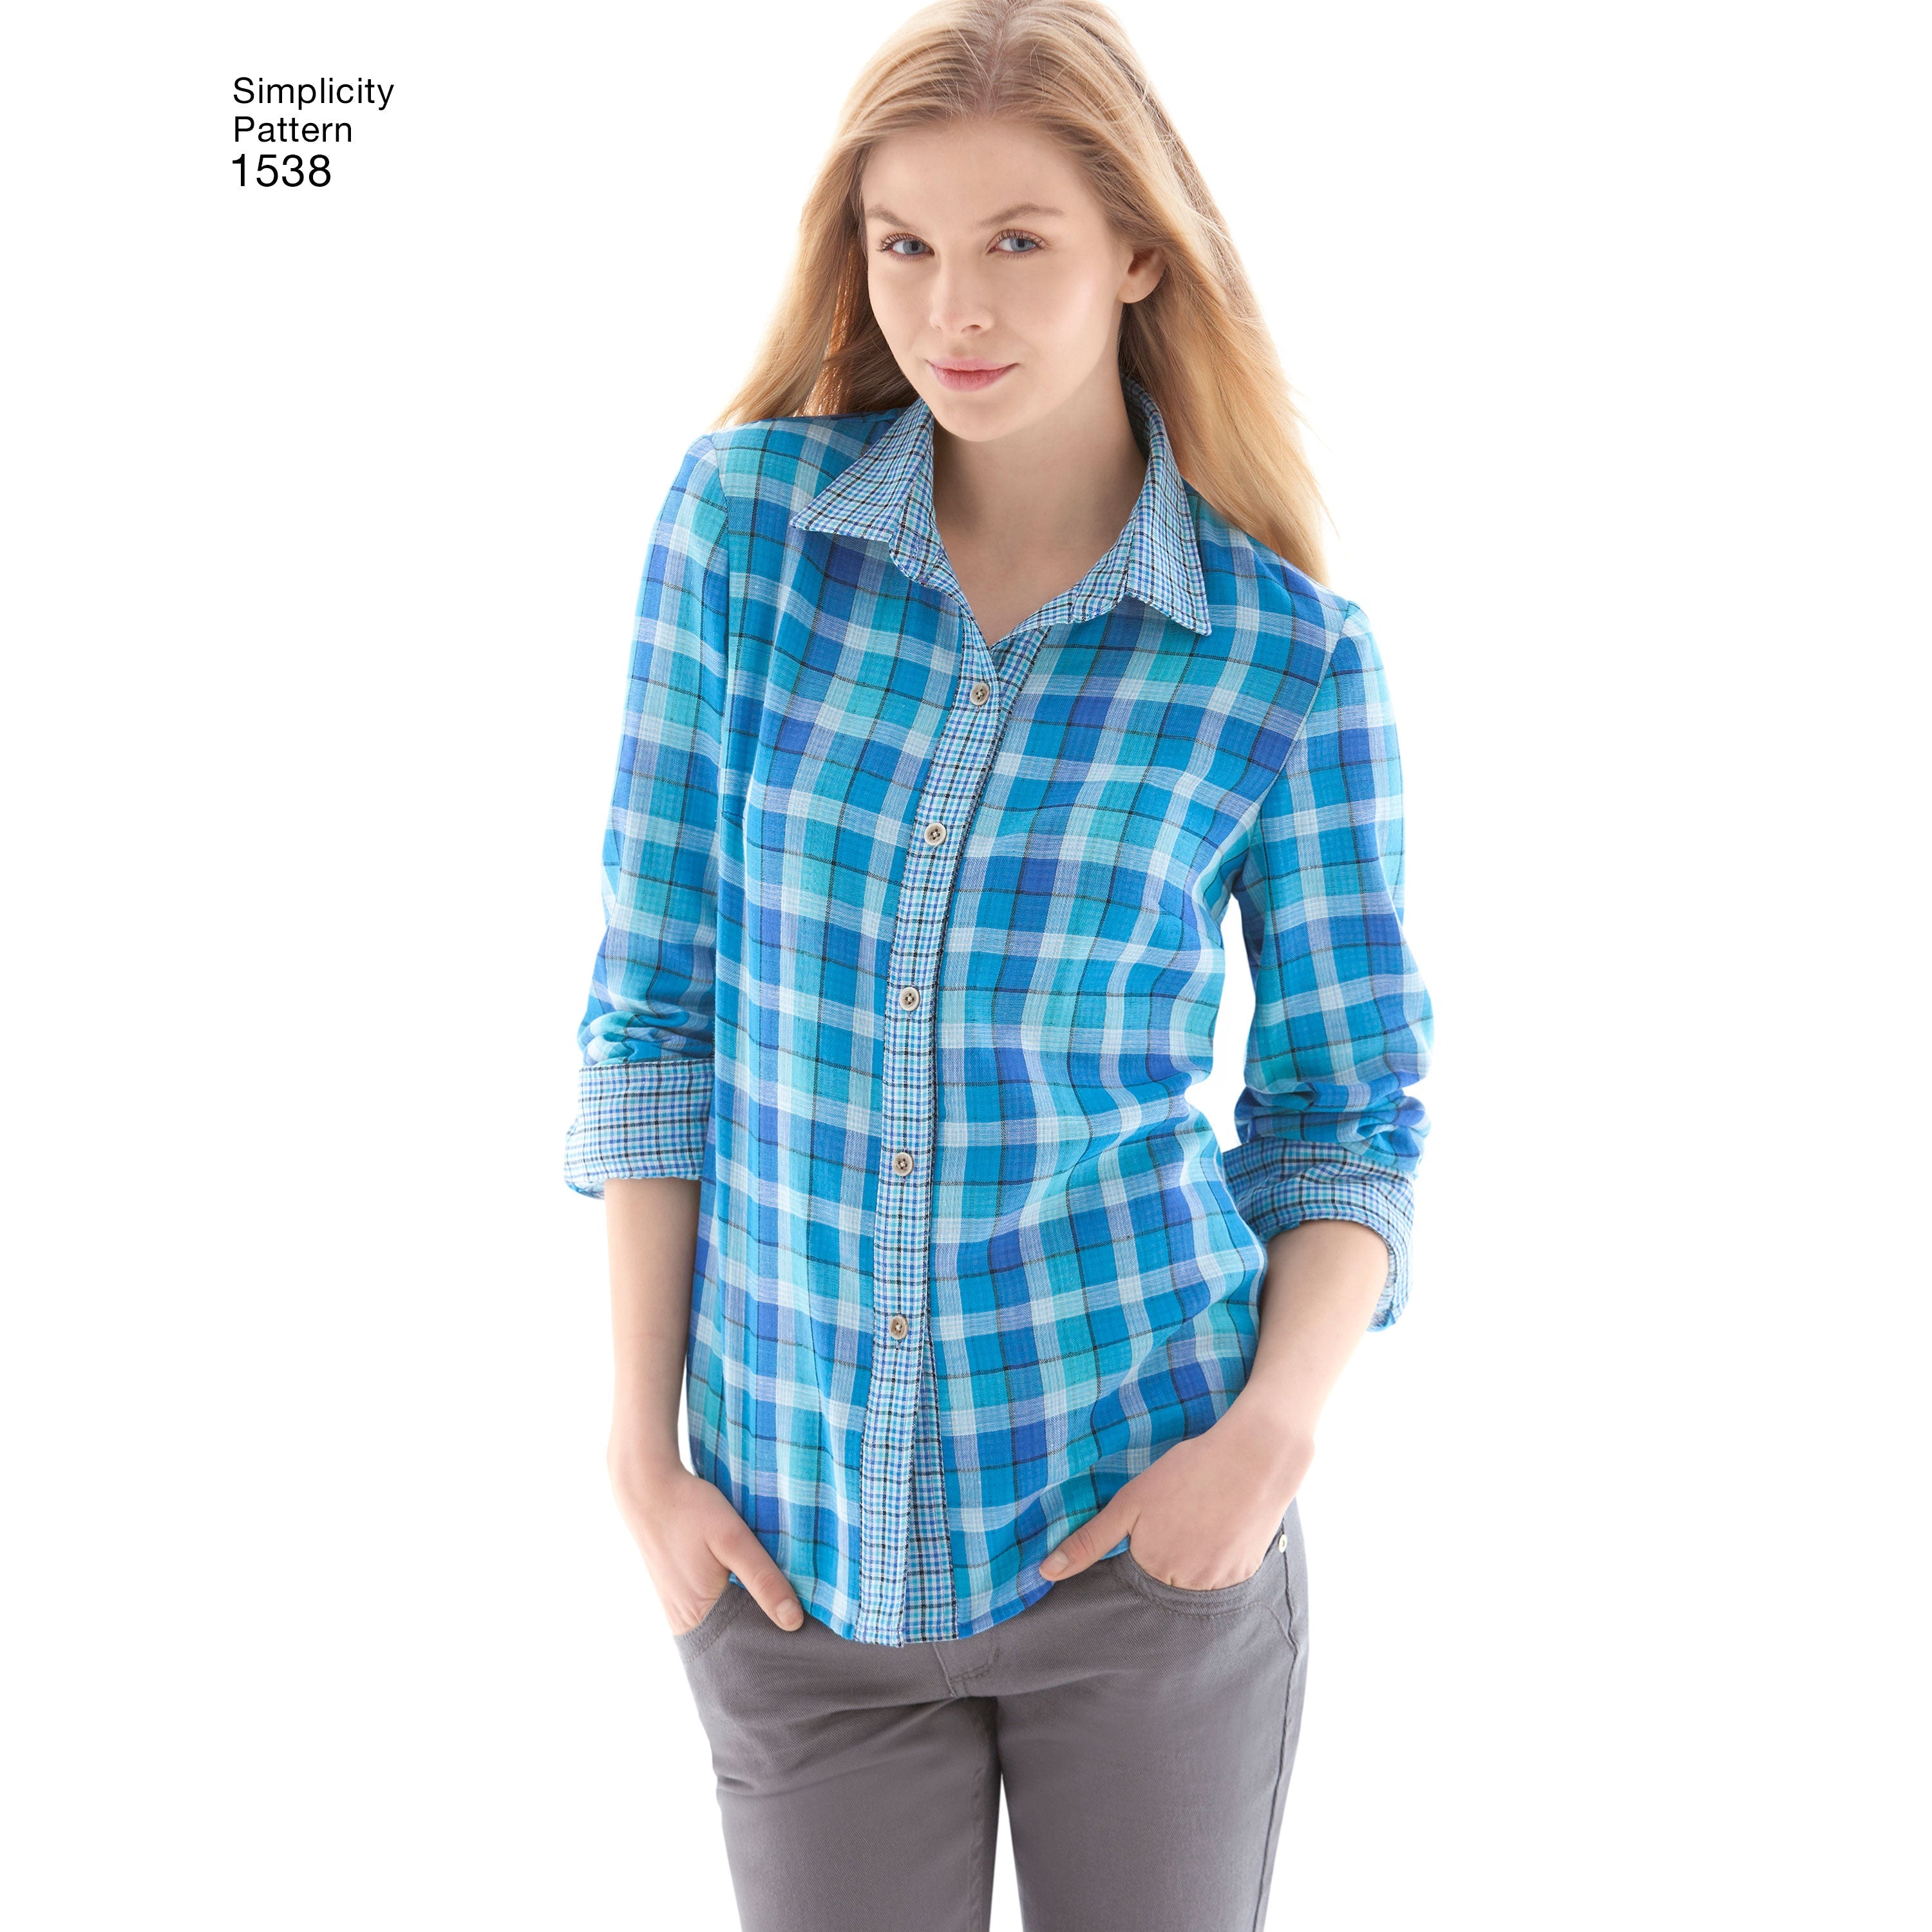 Simplicity Pattern 1538 Misses' shirt from Jaycotts Sewing Supplies